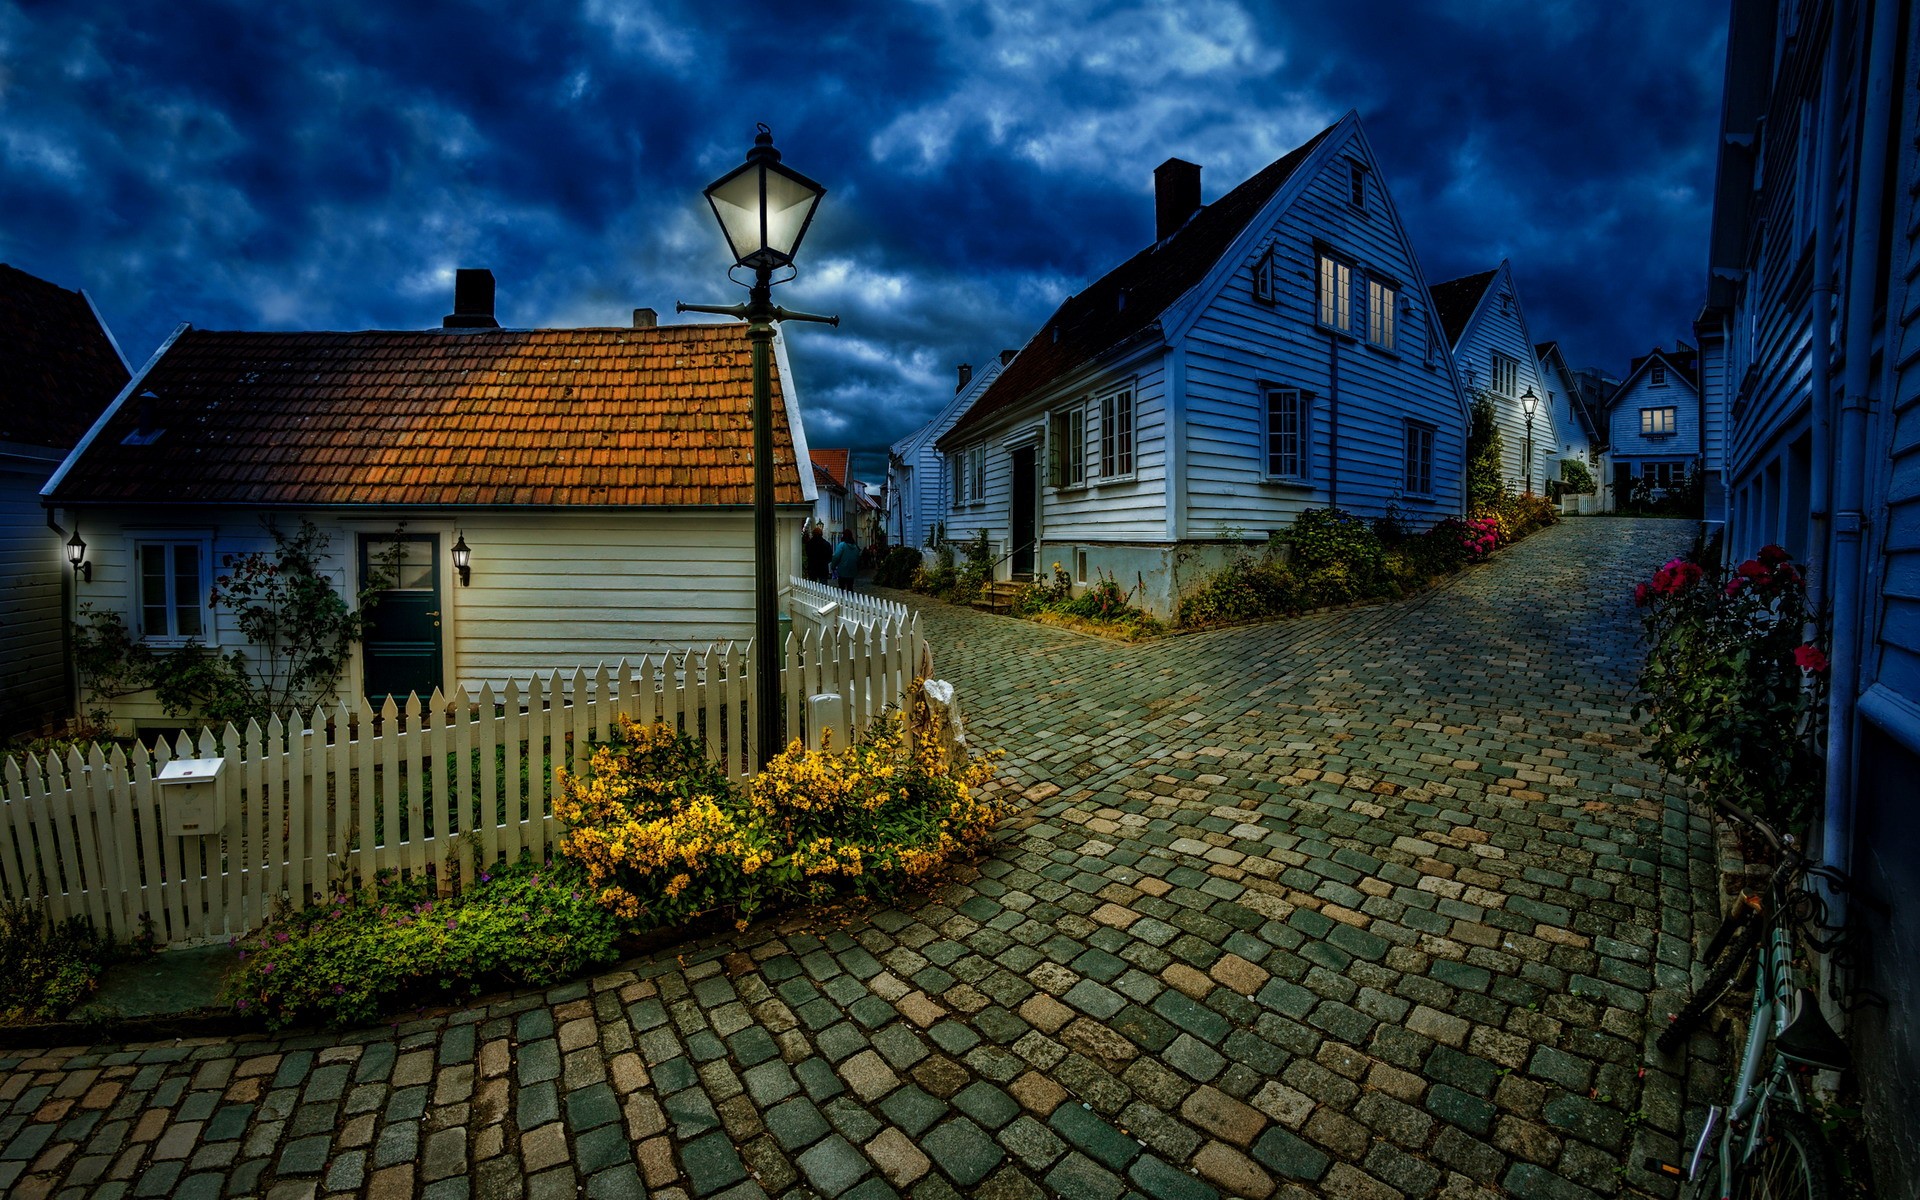 architecture, Building, Nature, Norway, House, Night, Street, Village, Street light, Hills, Clouds, Fence Wallpaper